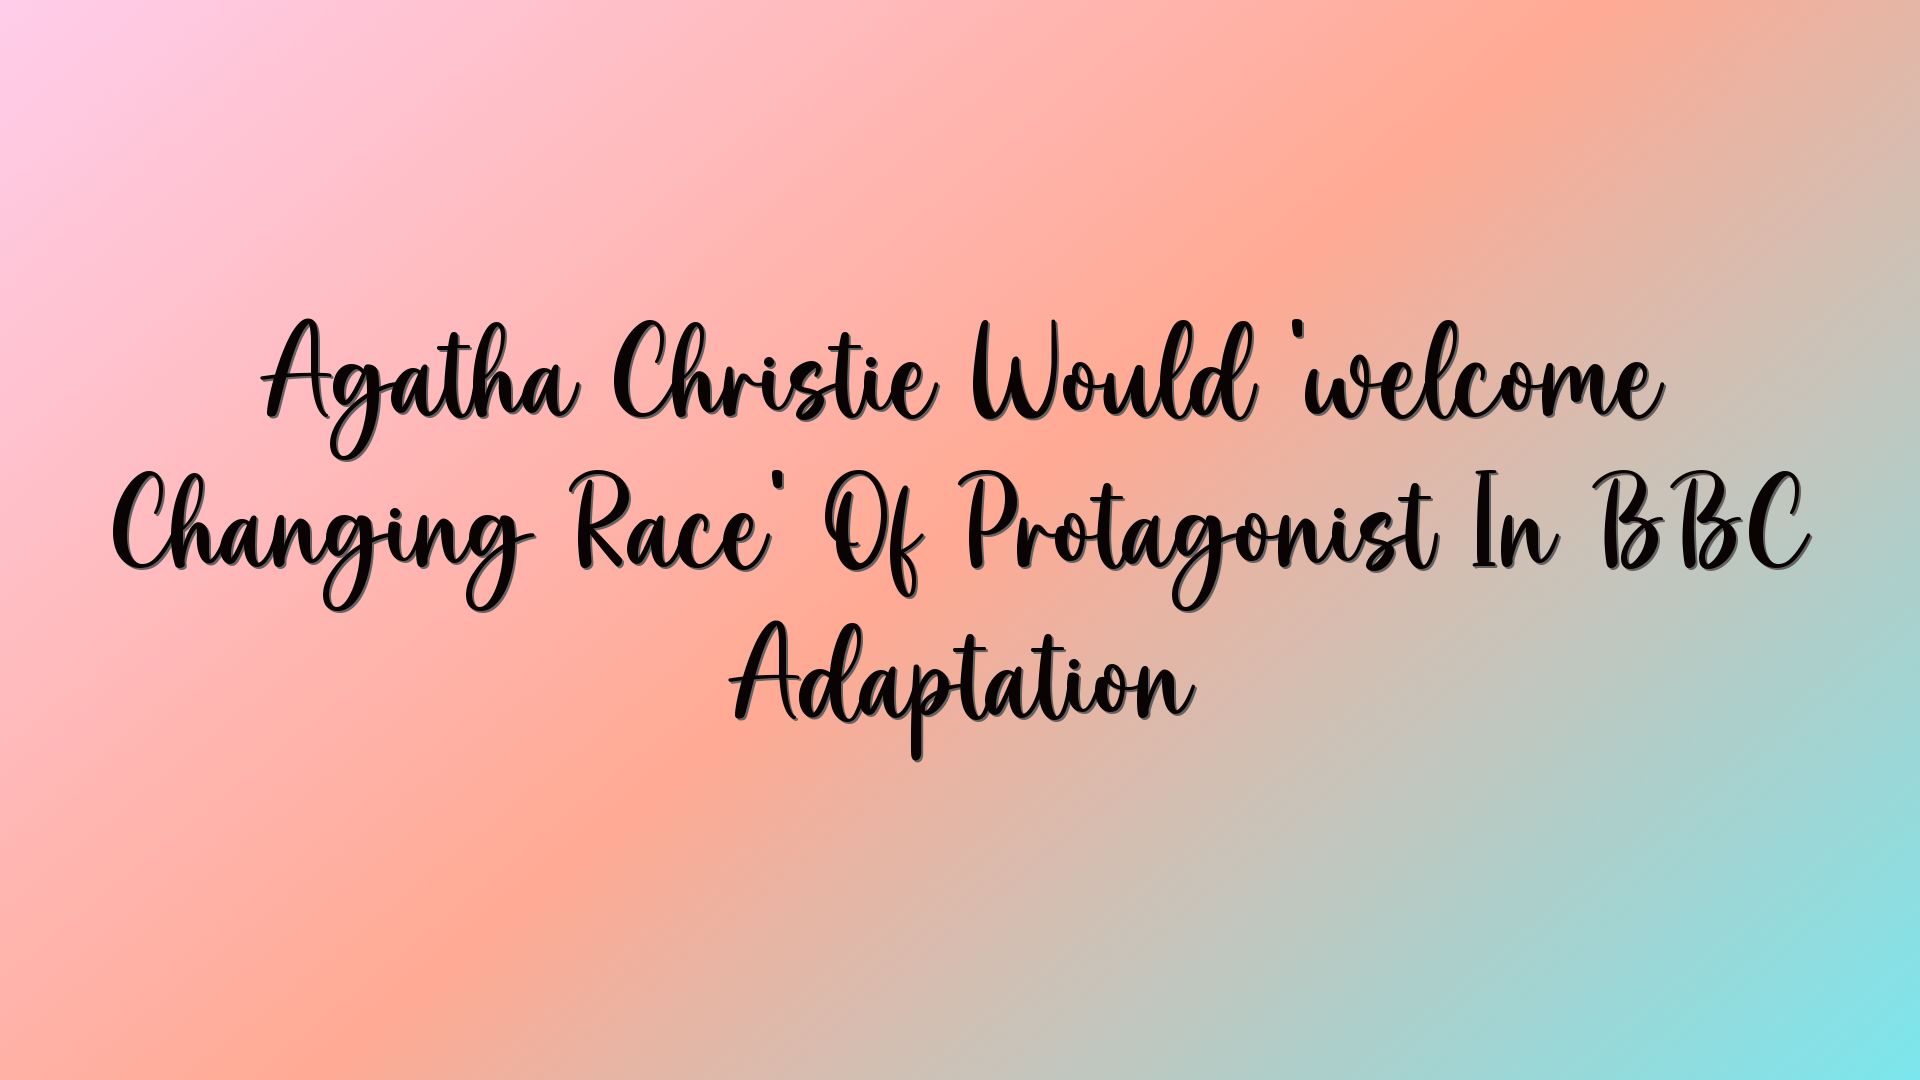 Agatha Christie Would ‘welcome Changing Race’ Of Protagonist In BBC Adaptation